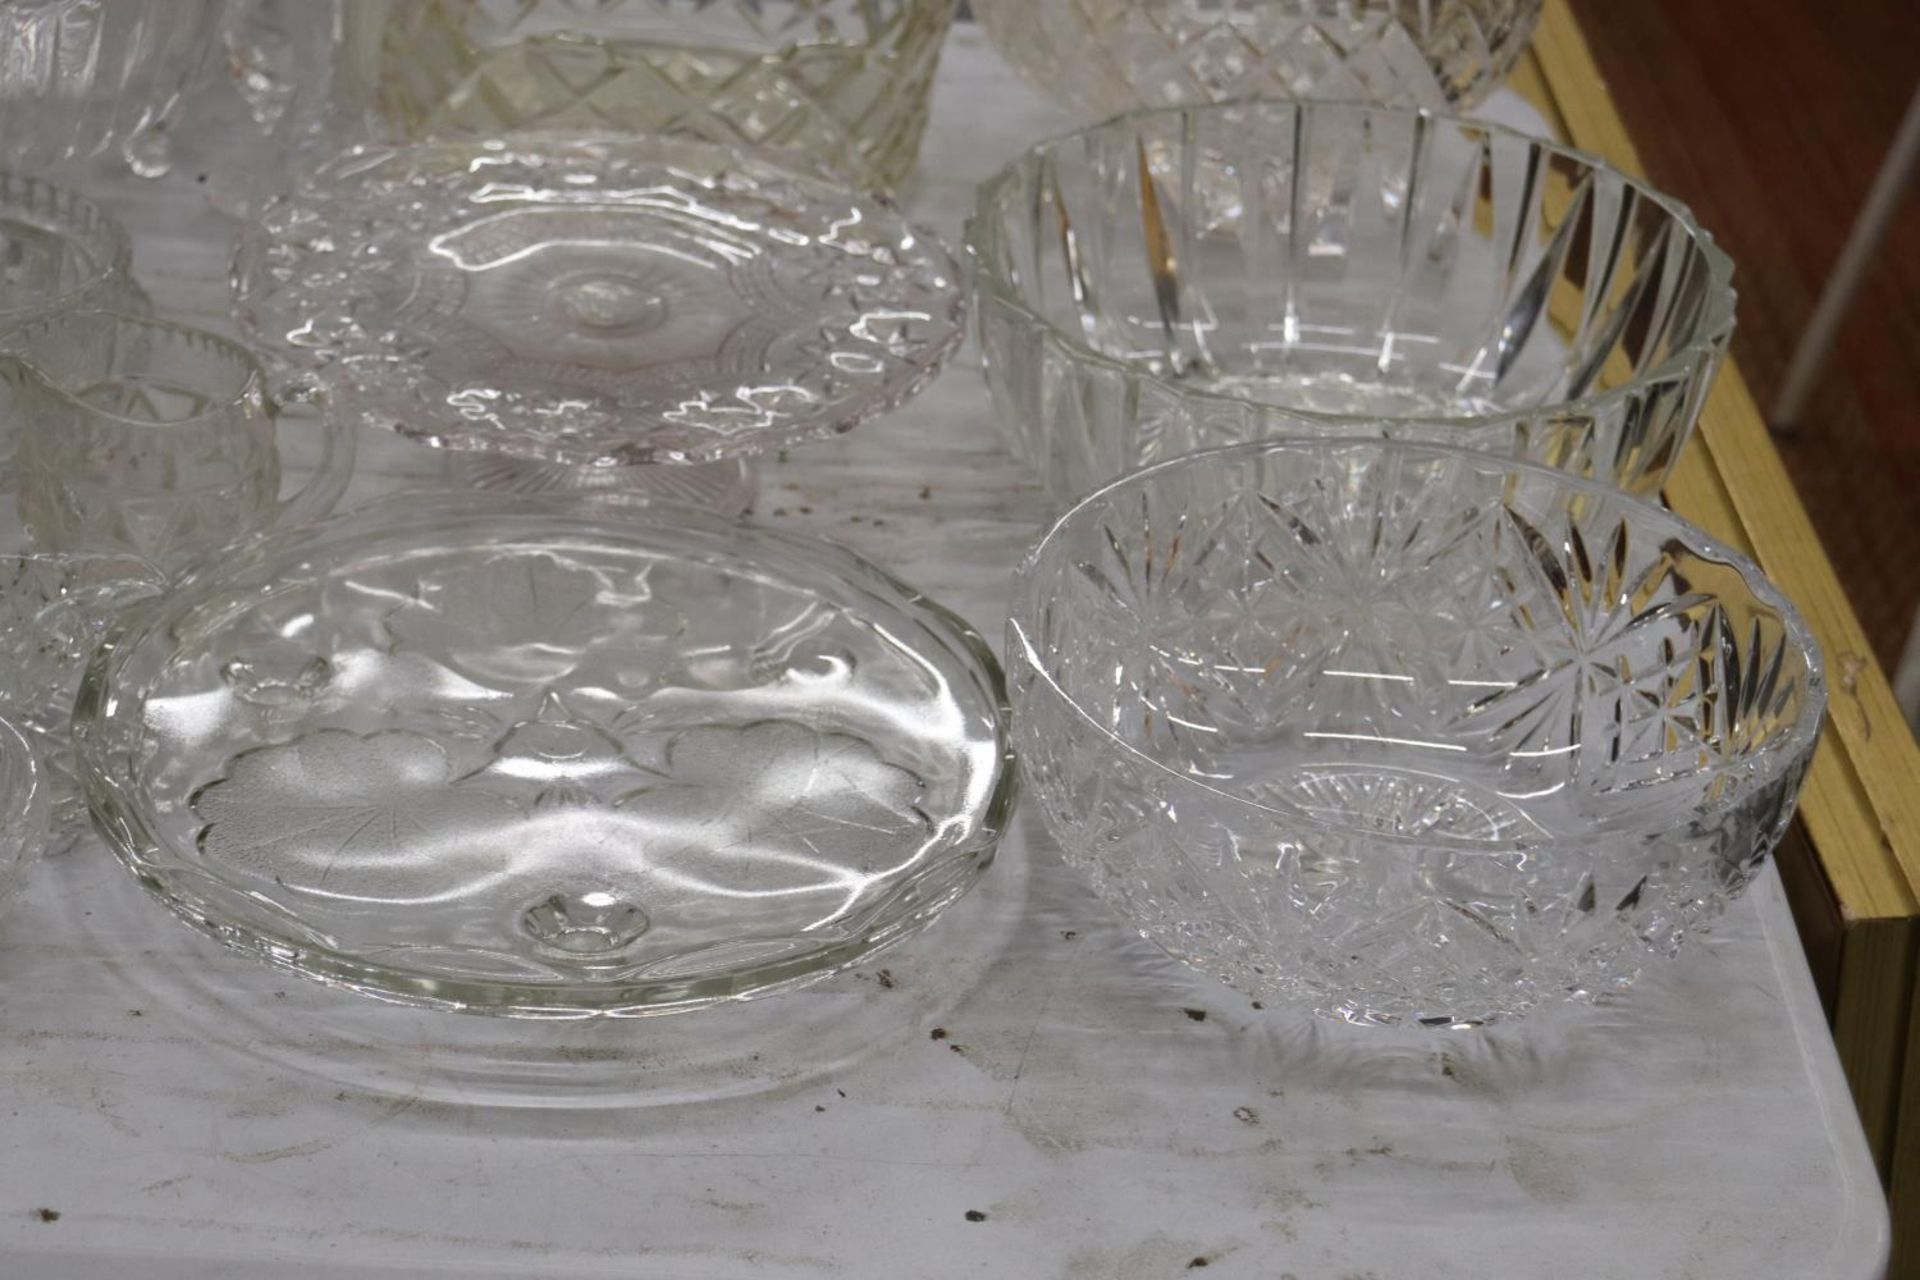 A LARGE QUANTITY OF GLASSWARE TO INCLUDE LARGE BOWLS, VASES, CANDLESTICKS, A GLOBE, ETC - Image 3 of 6